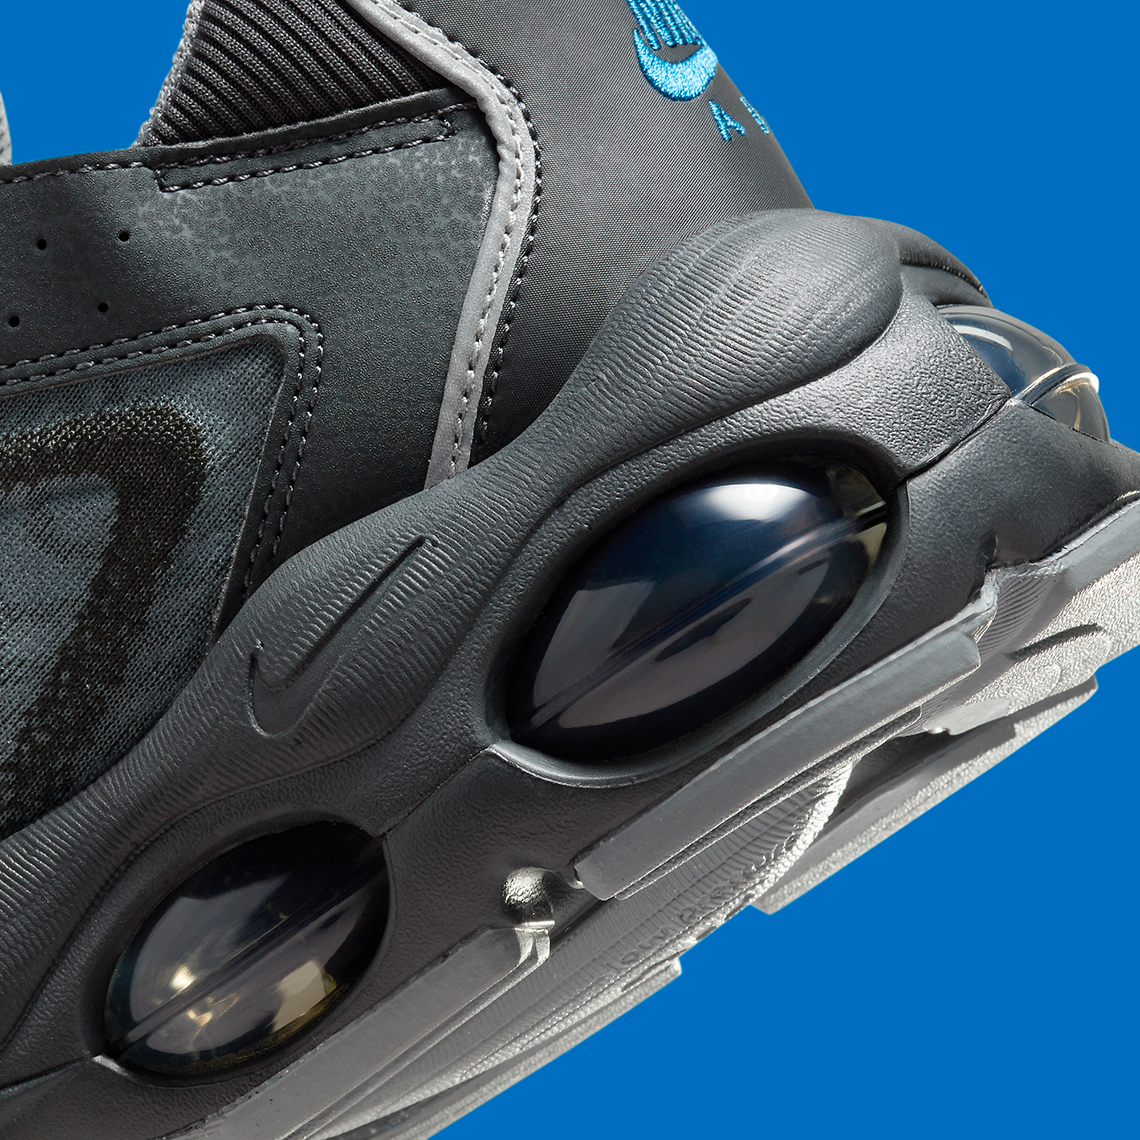 Nike Air technology absorbs impact for cushioning with every step Pulse Grey Black Blue Fv0940 001 1